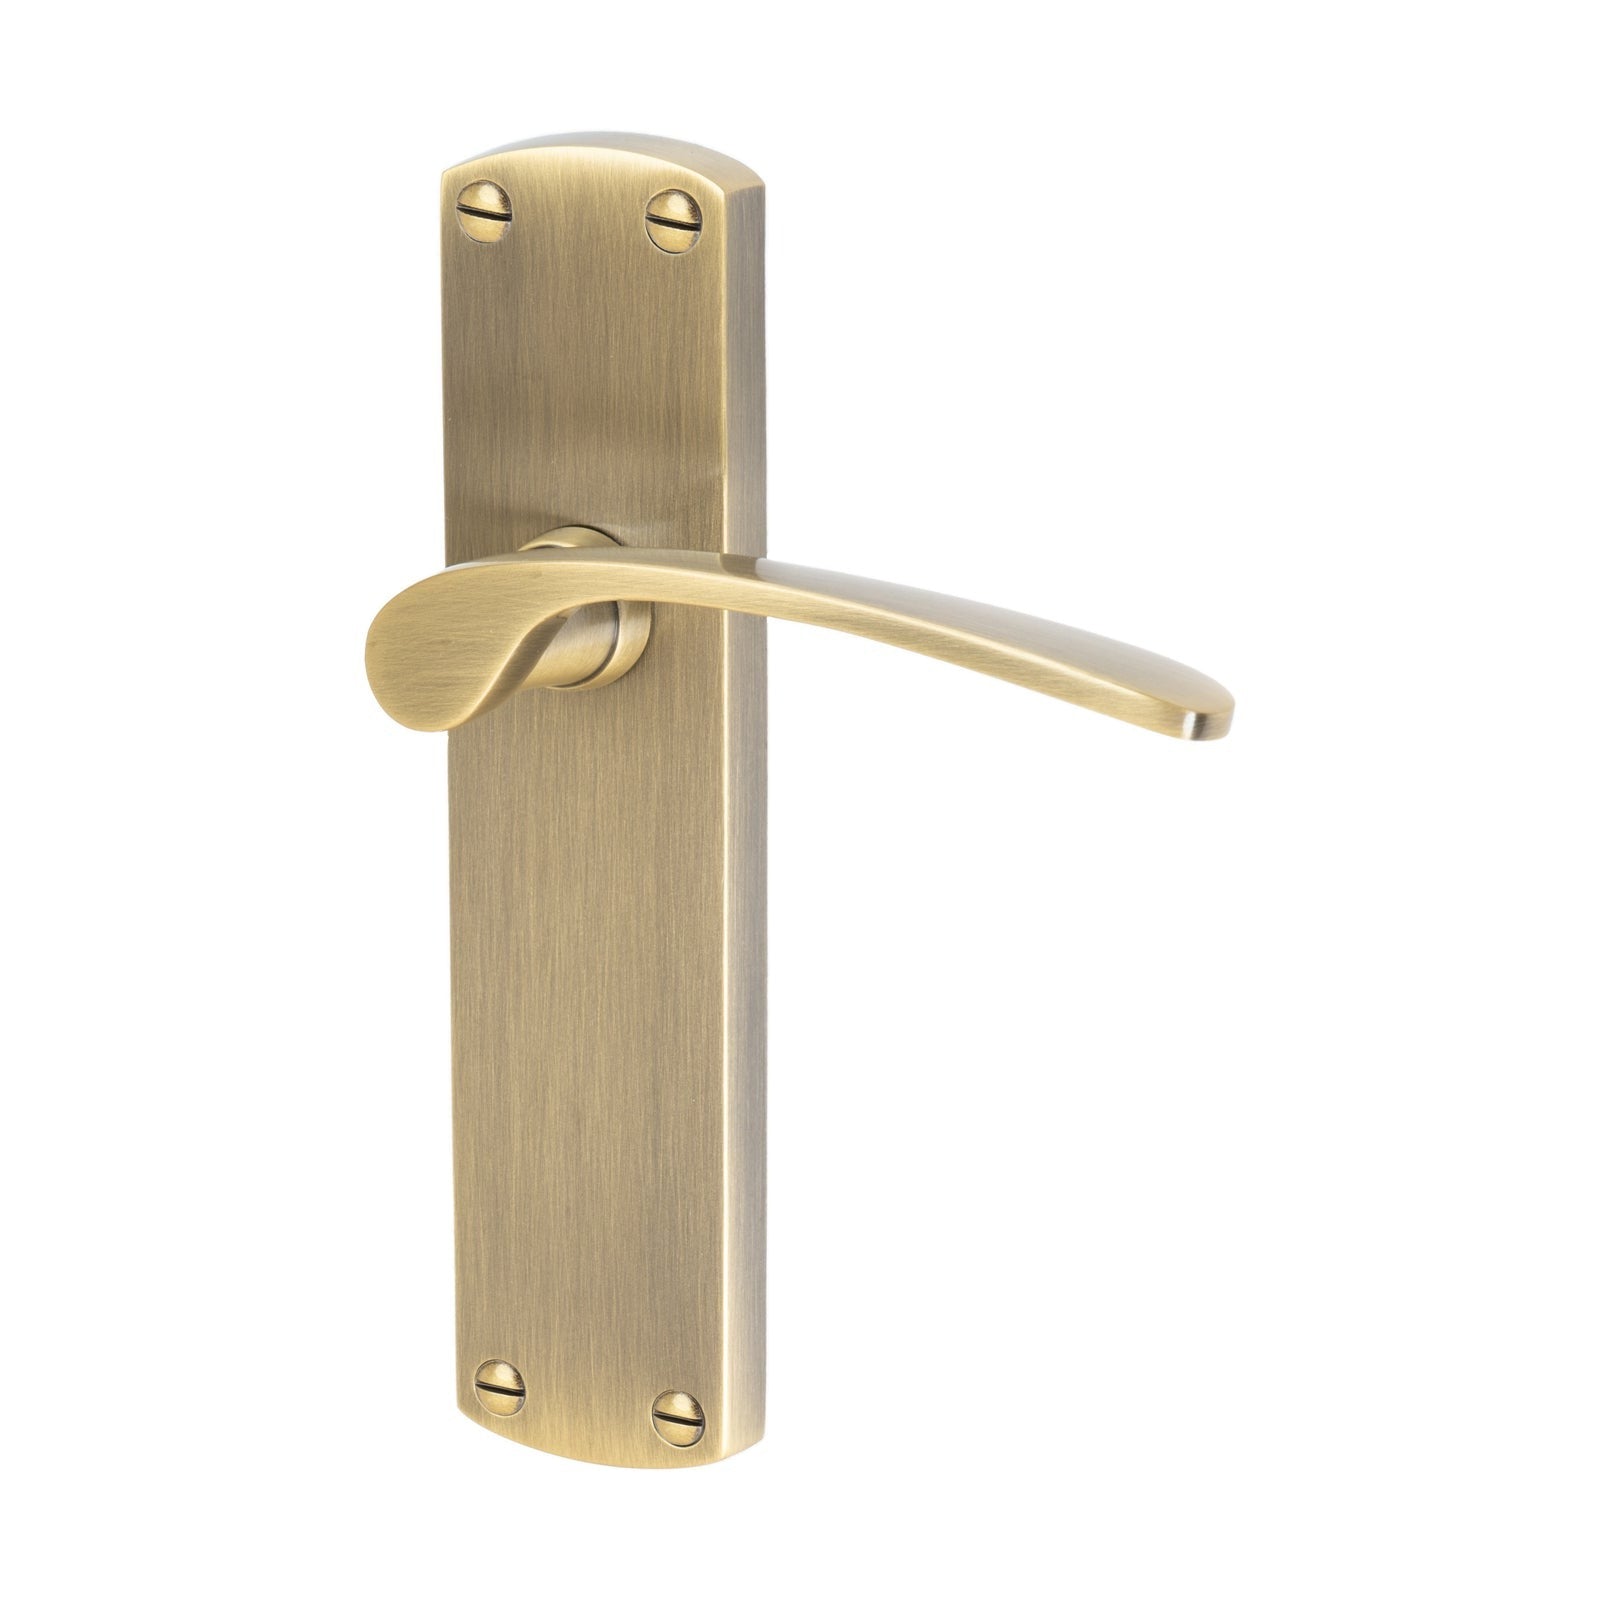 Diplomat Door Handles On Plate Latch Handle in Aged Brass SHOW